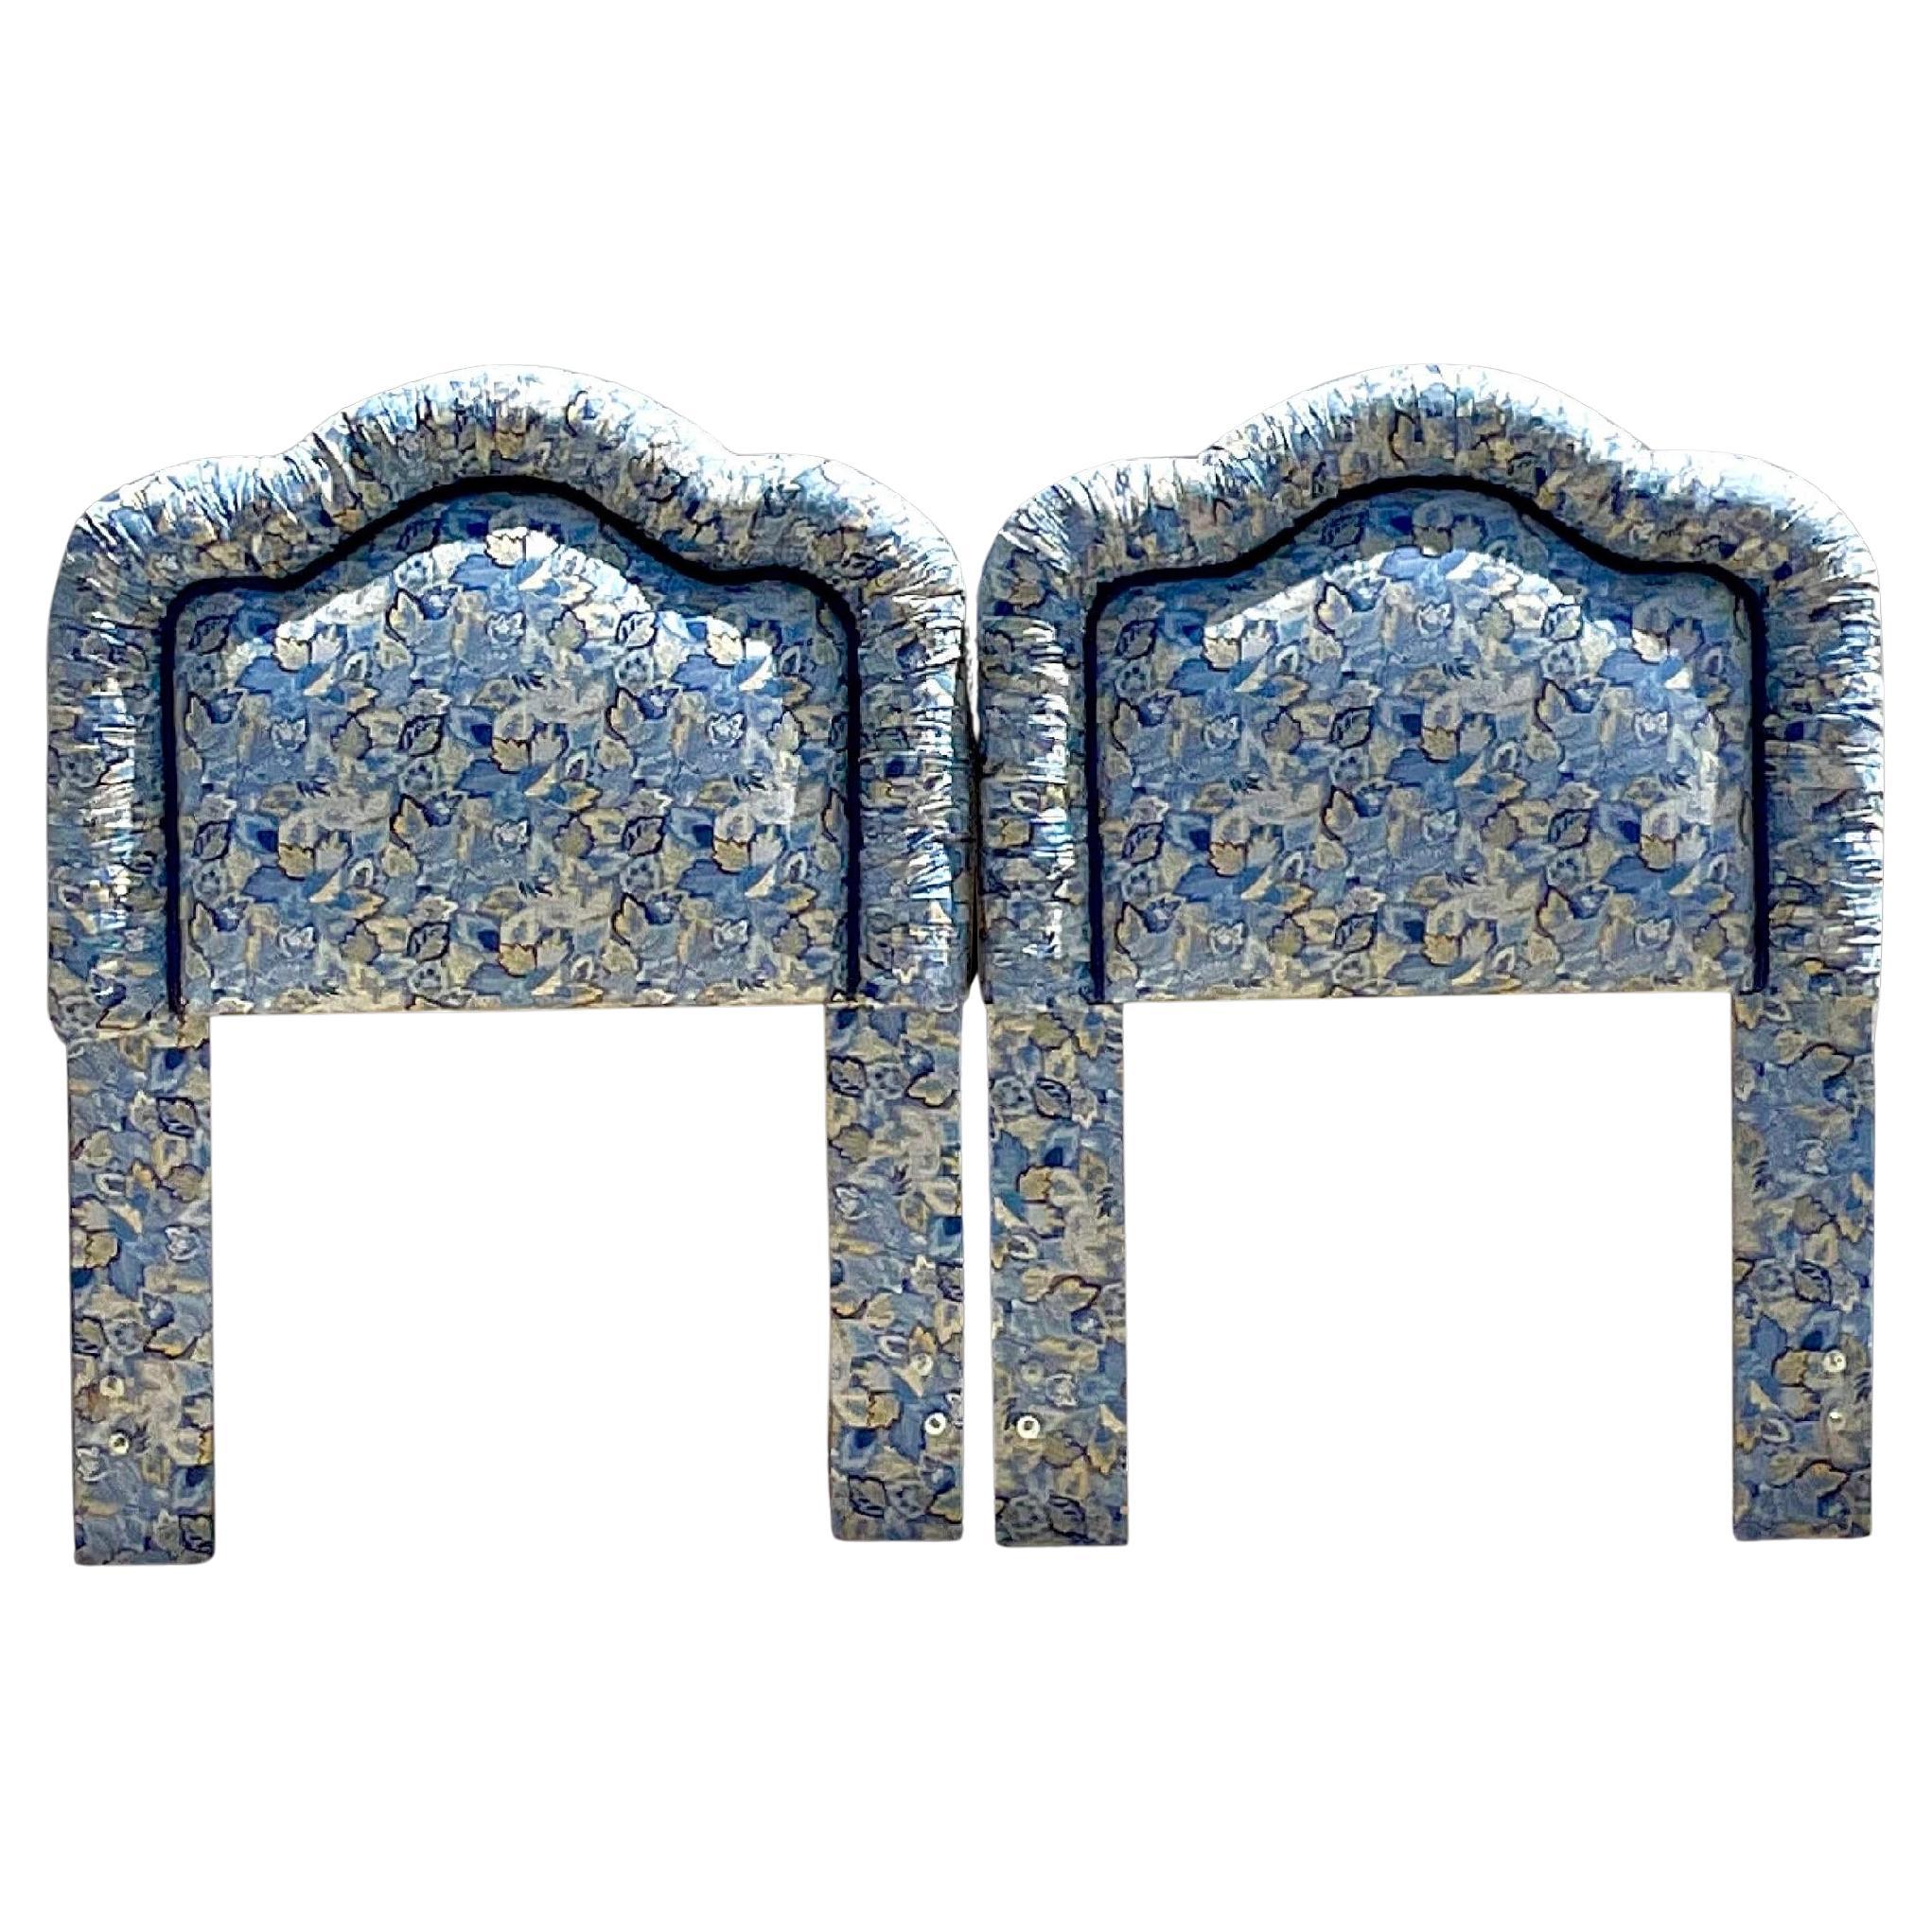 Late 20th Century Vintage Boho Paisley Upholstered Twin Headboards - a Pair